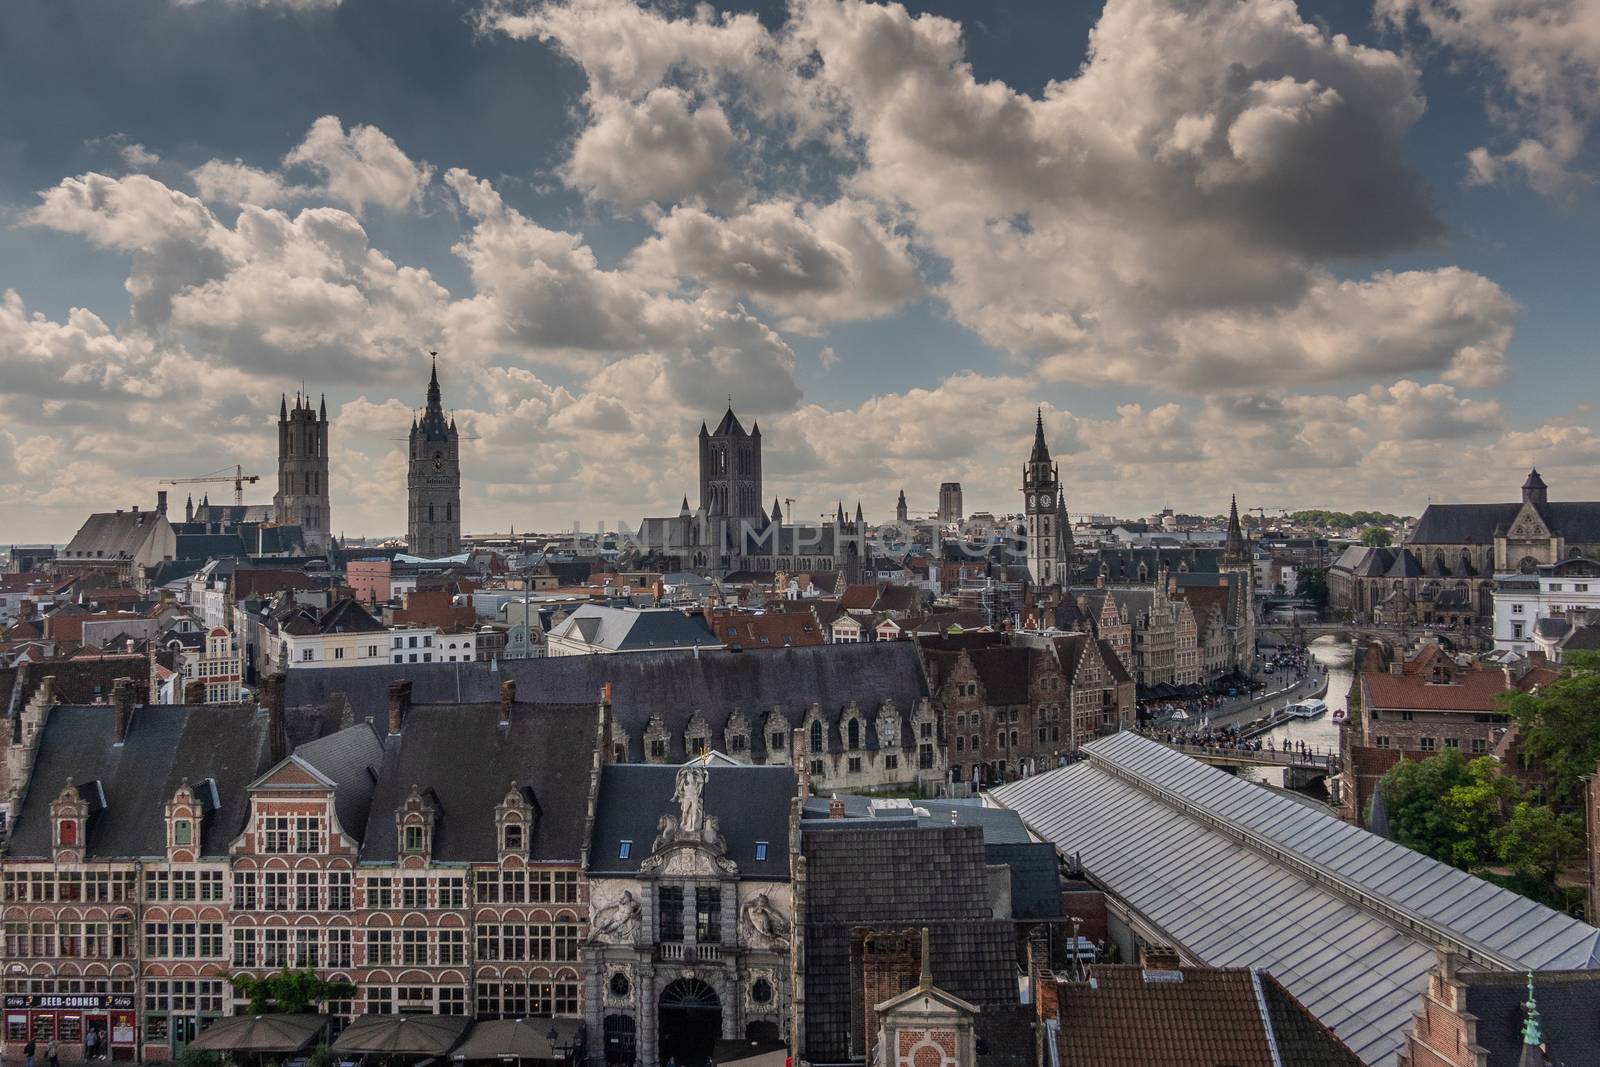 Gent, Flanders, Belgium -  June 21, 2019: Shot from castle tower, view over city roofs shows six most important and historic towers of Belfry, churches, Postal service, and university. Fish market gate. Cloudscape with blue patches.